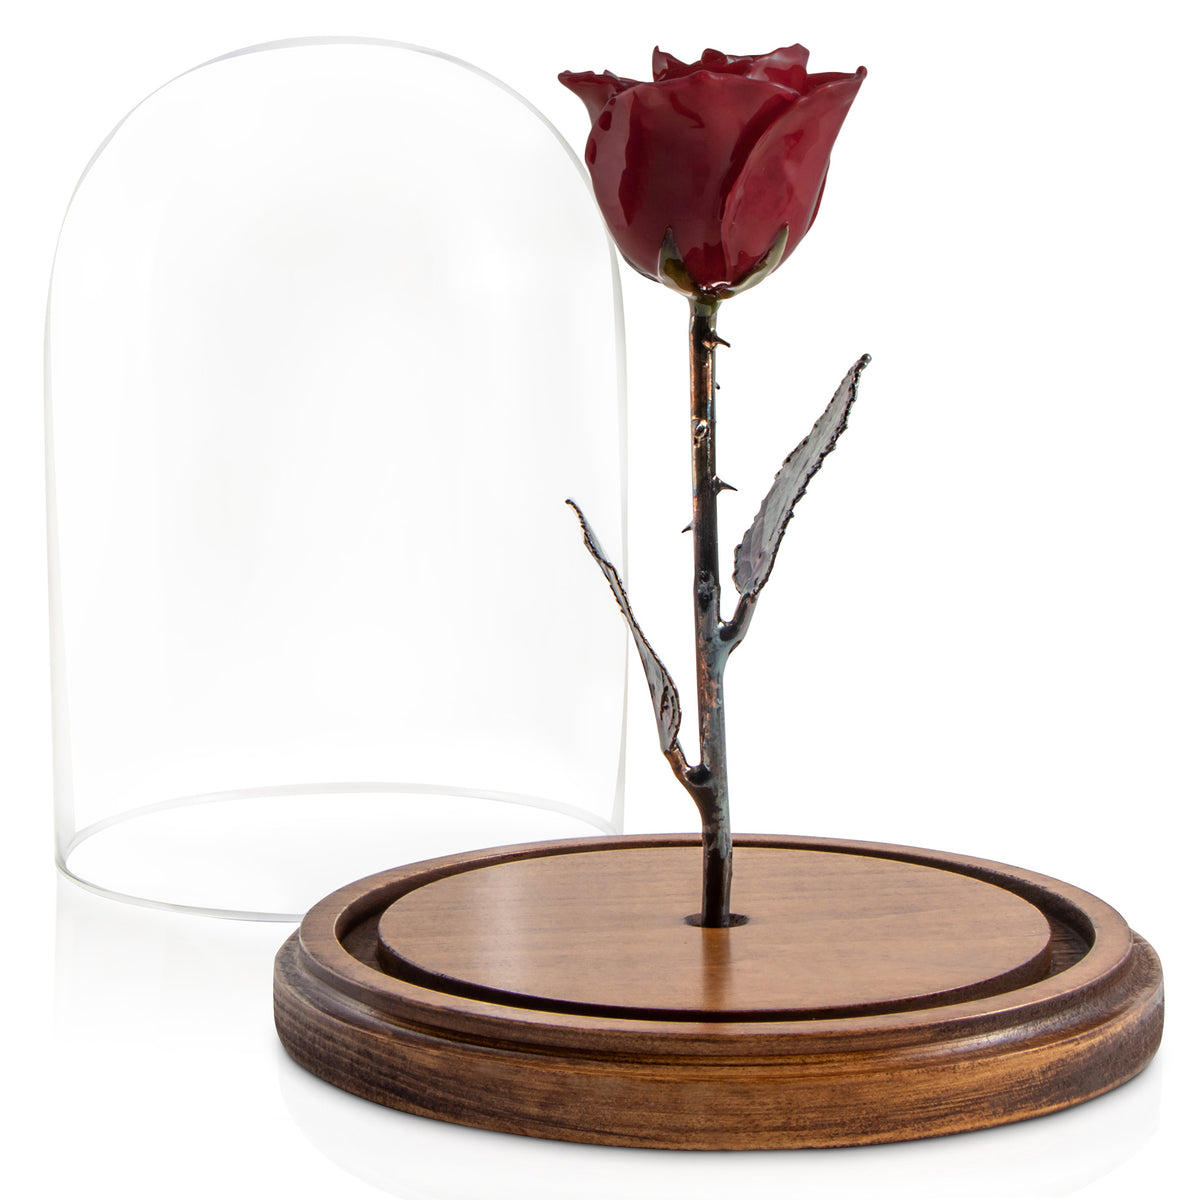 Burgundy Enchanted Rose (aka Beauty &amp; The Beast Rose) with Patina Copper Stem Mounted to A Hand Turned Solid Wood Base under a glass dome.